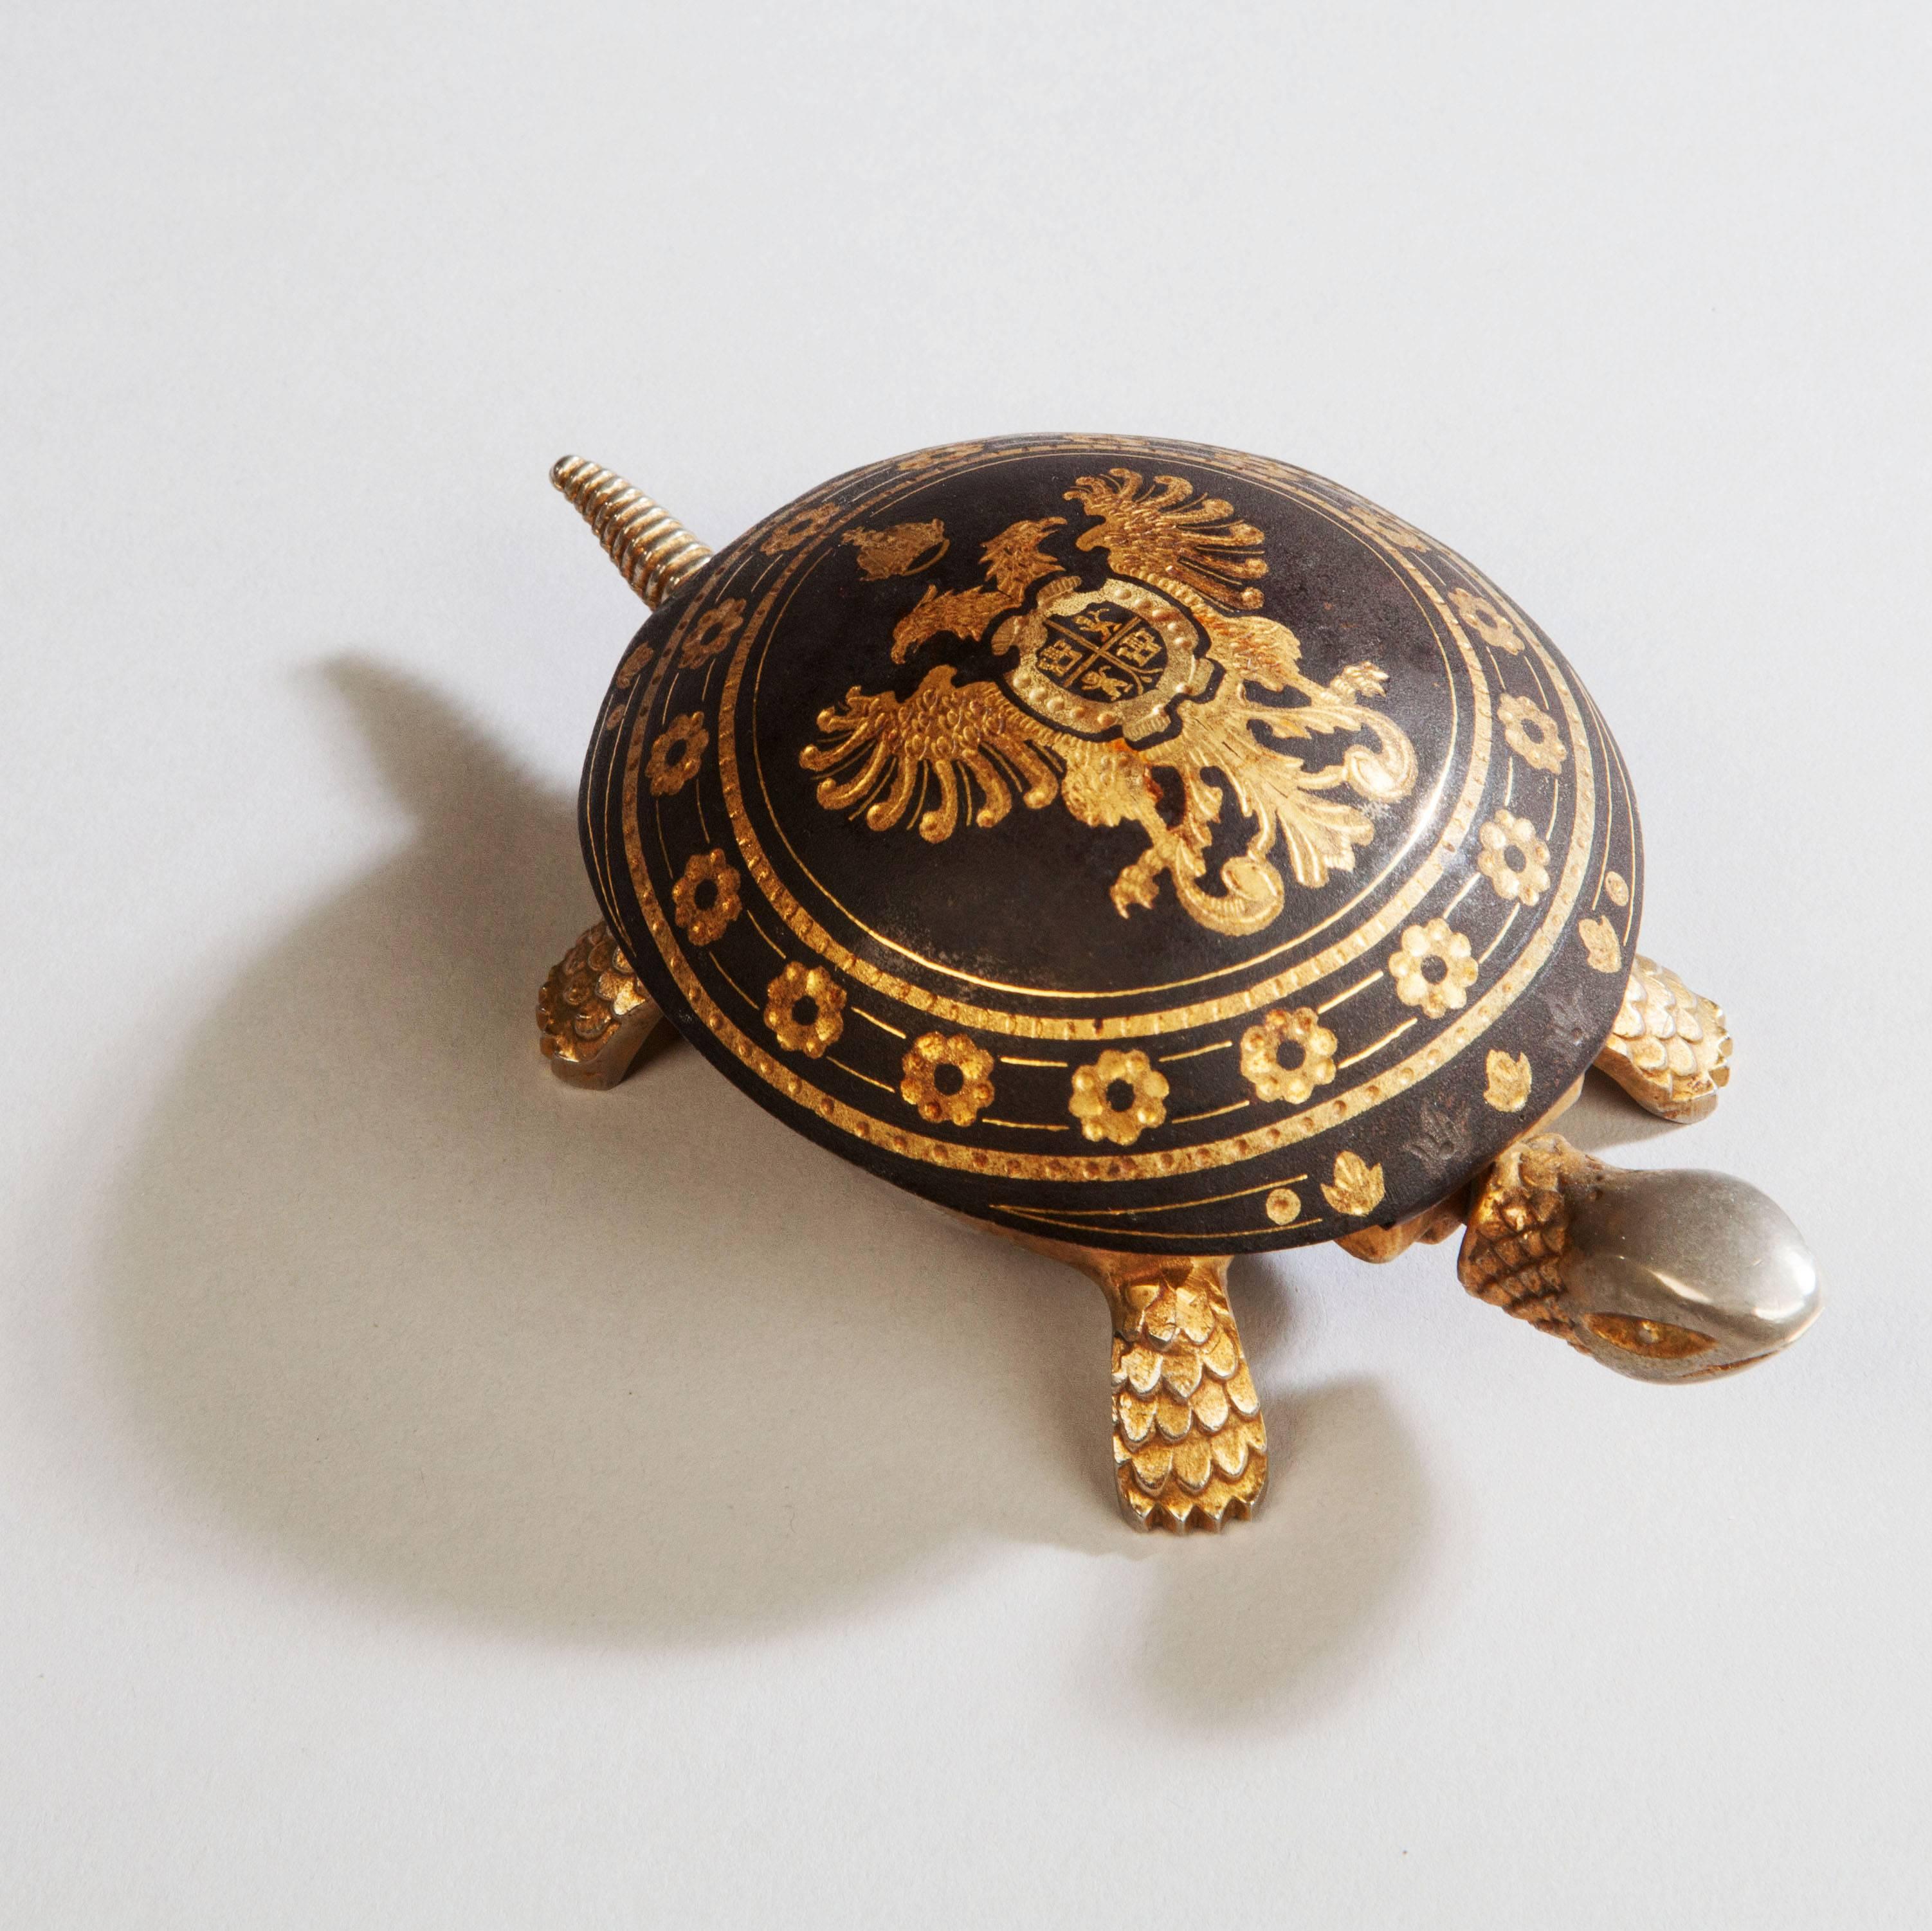 A fine 20th century table bell in the form of a tortoise, the damascened and gilt tortoiseshell with the Imperial Royal Coat of Arms of the Holy Roman Emperor. 

Pressing the head or tail triggers the wind up bell.